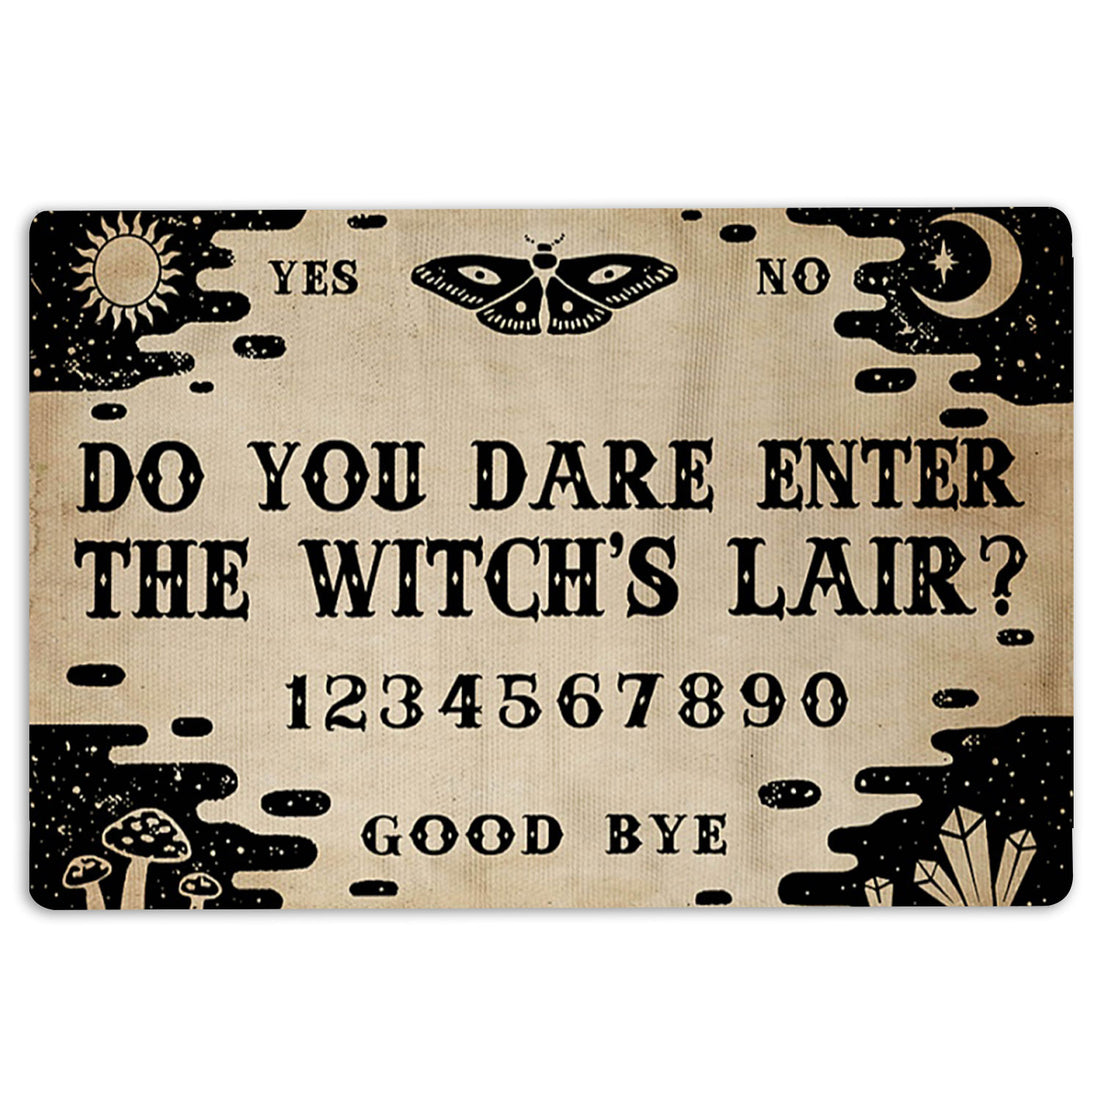 Ohaprints-Doormat-Outdoor-Indoor-Witch-Do-You-Dare-Enter-The-Witch'S-Lair?-Wicca-Wiccan-Witch-Rubber-Door-Mat-73-18'' x 30''